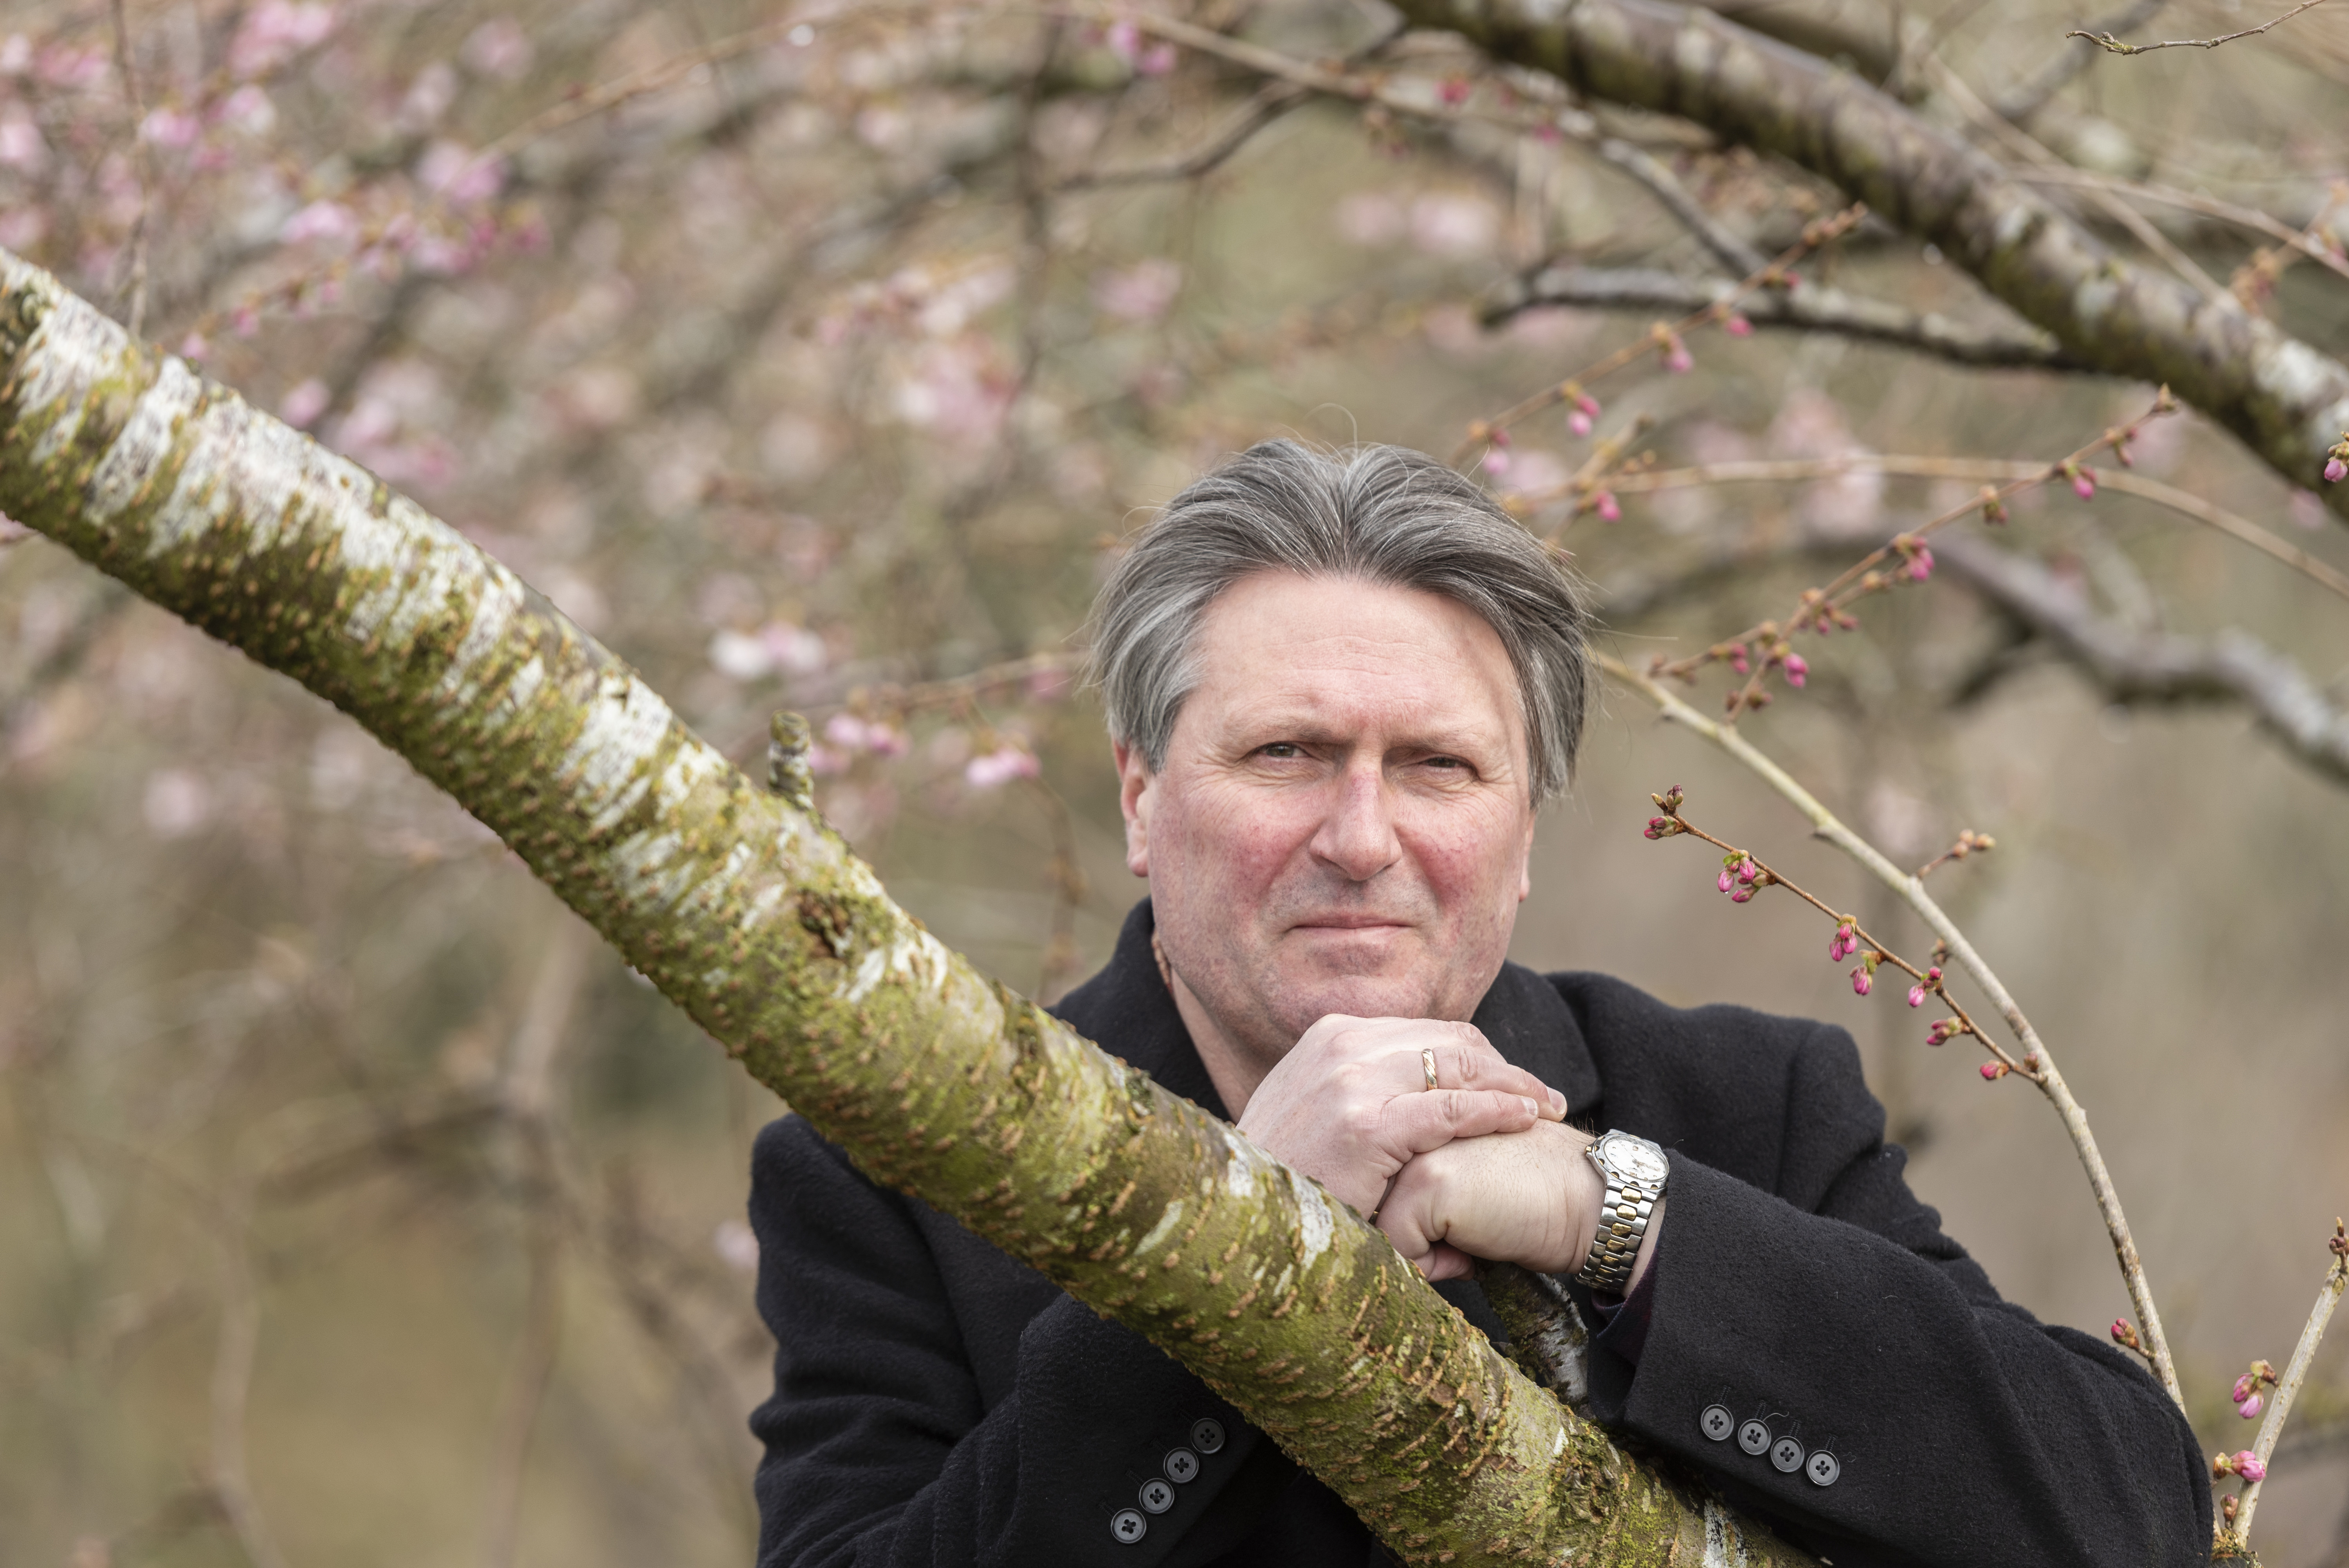 Poet laureate Simon Armitage leans on a tree branch with blossom in the background